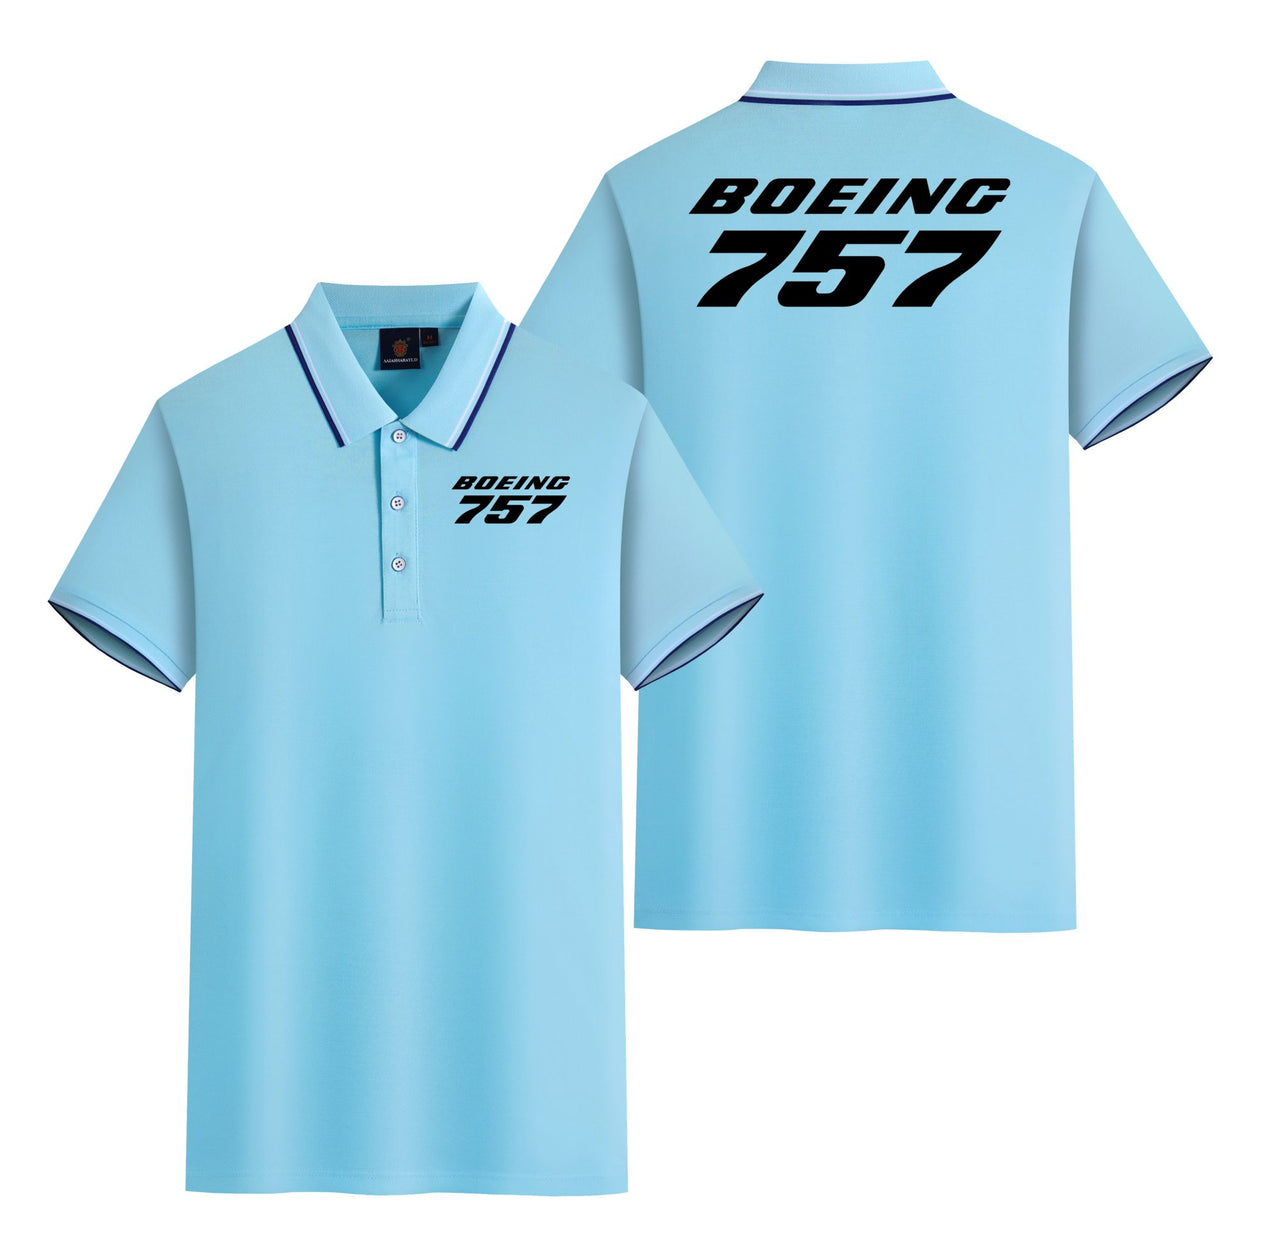 Boeing 757 & Text Designed Stylish Polo T-Shirts (Double-Side)